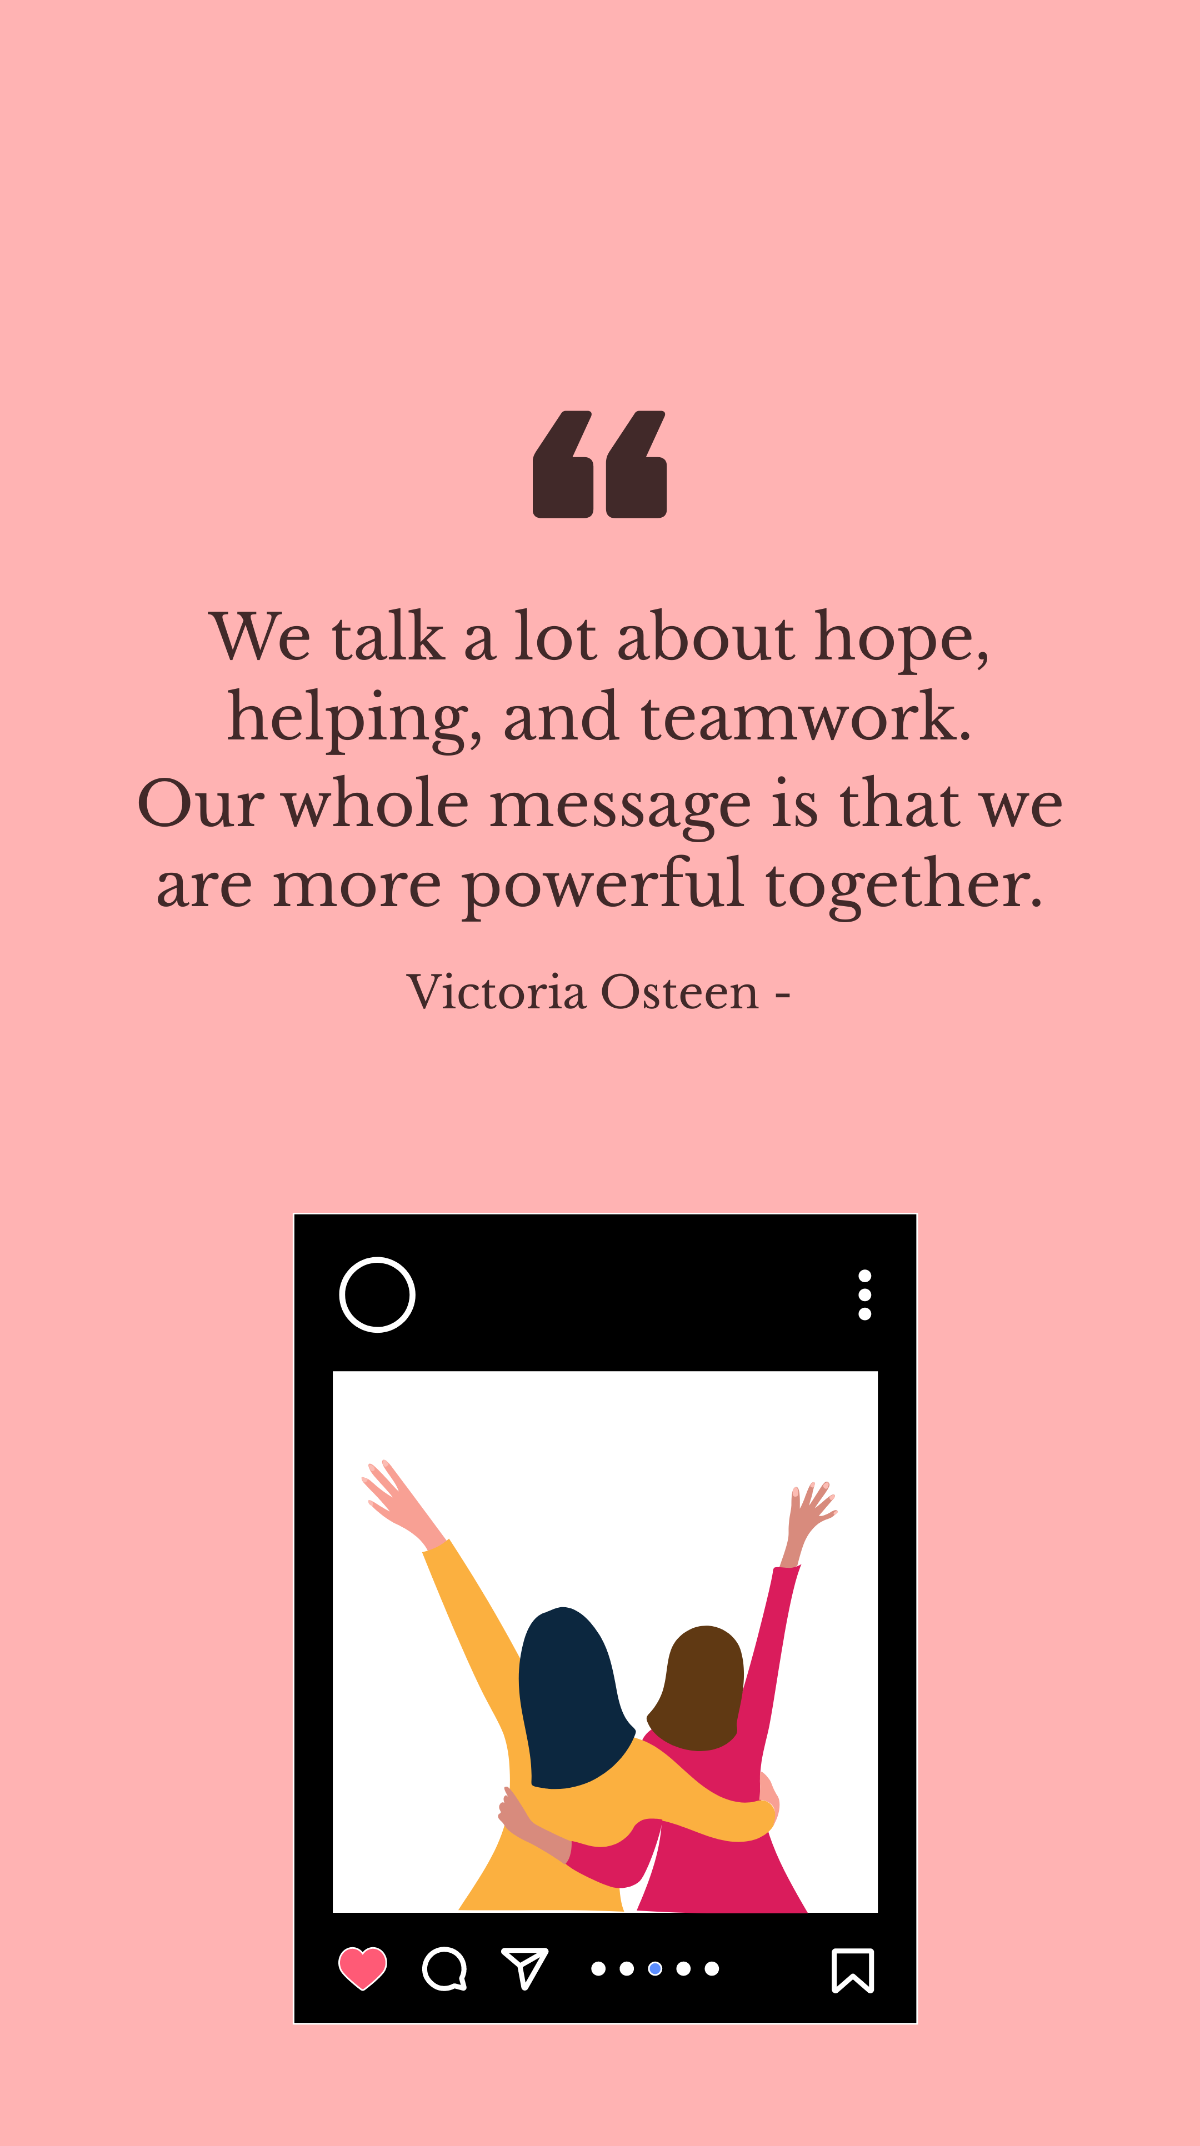 Victoria Osteen - We talk a lot about hope, helping, and teamwork. Our whole message is that we are more powerful together. Template